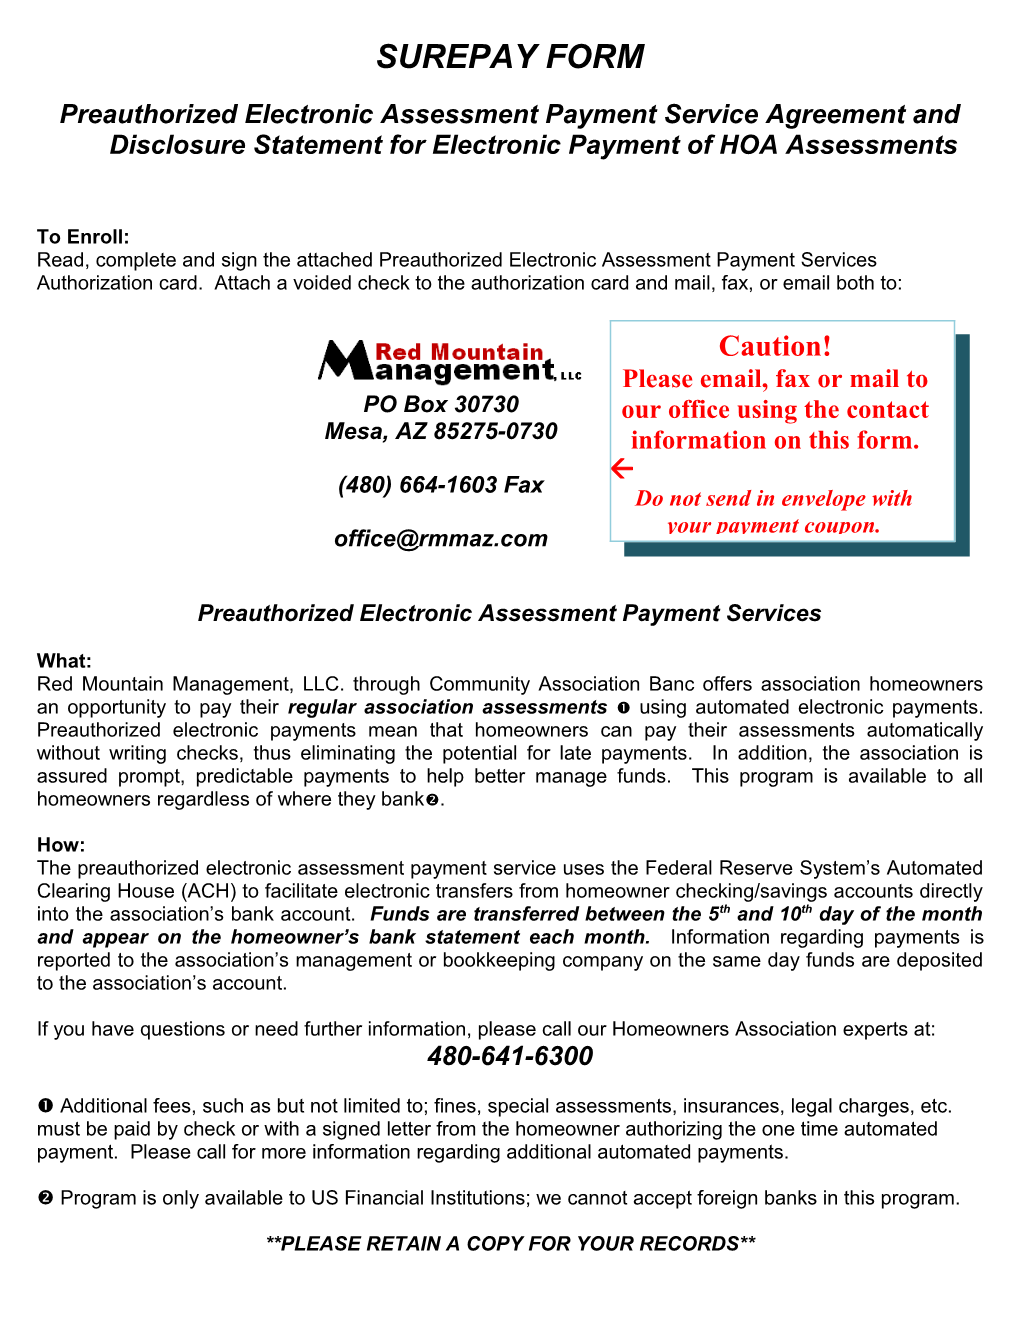 Preauthorized Electronic Assessment Payment Services